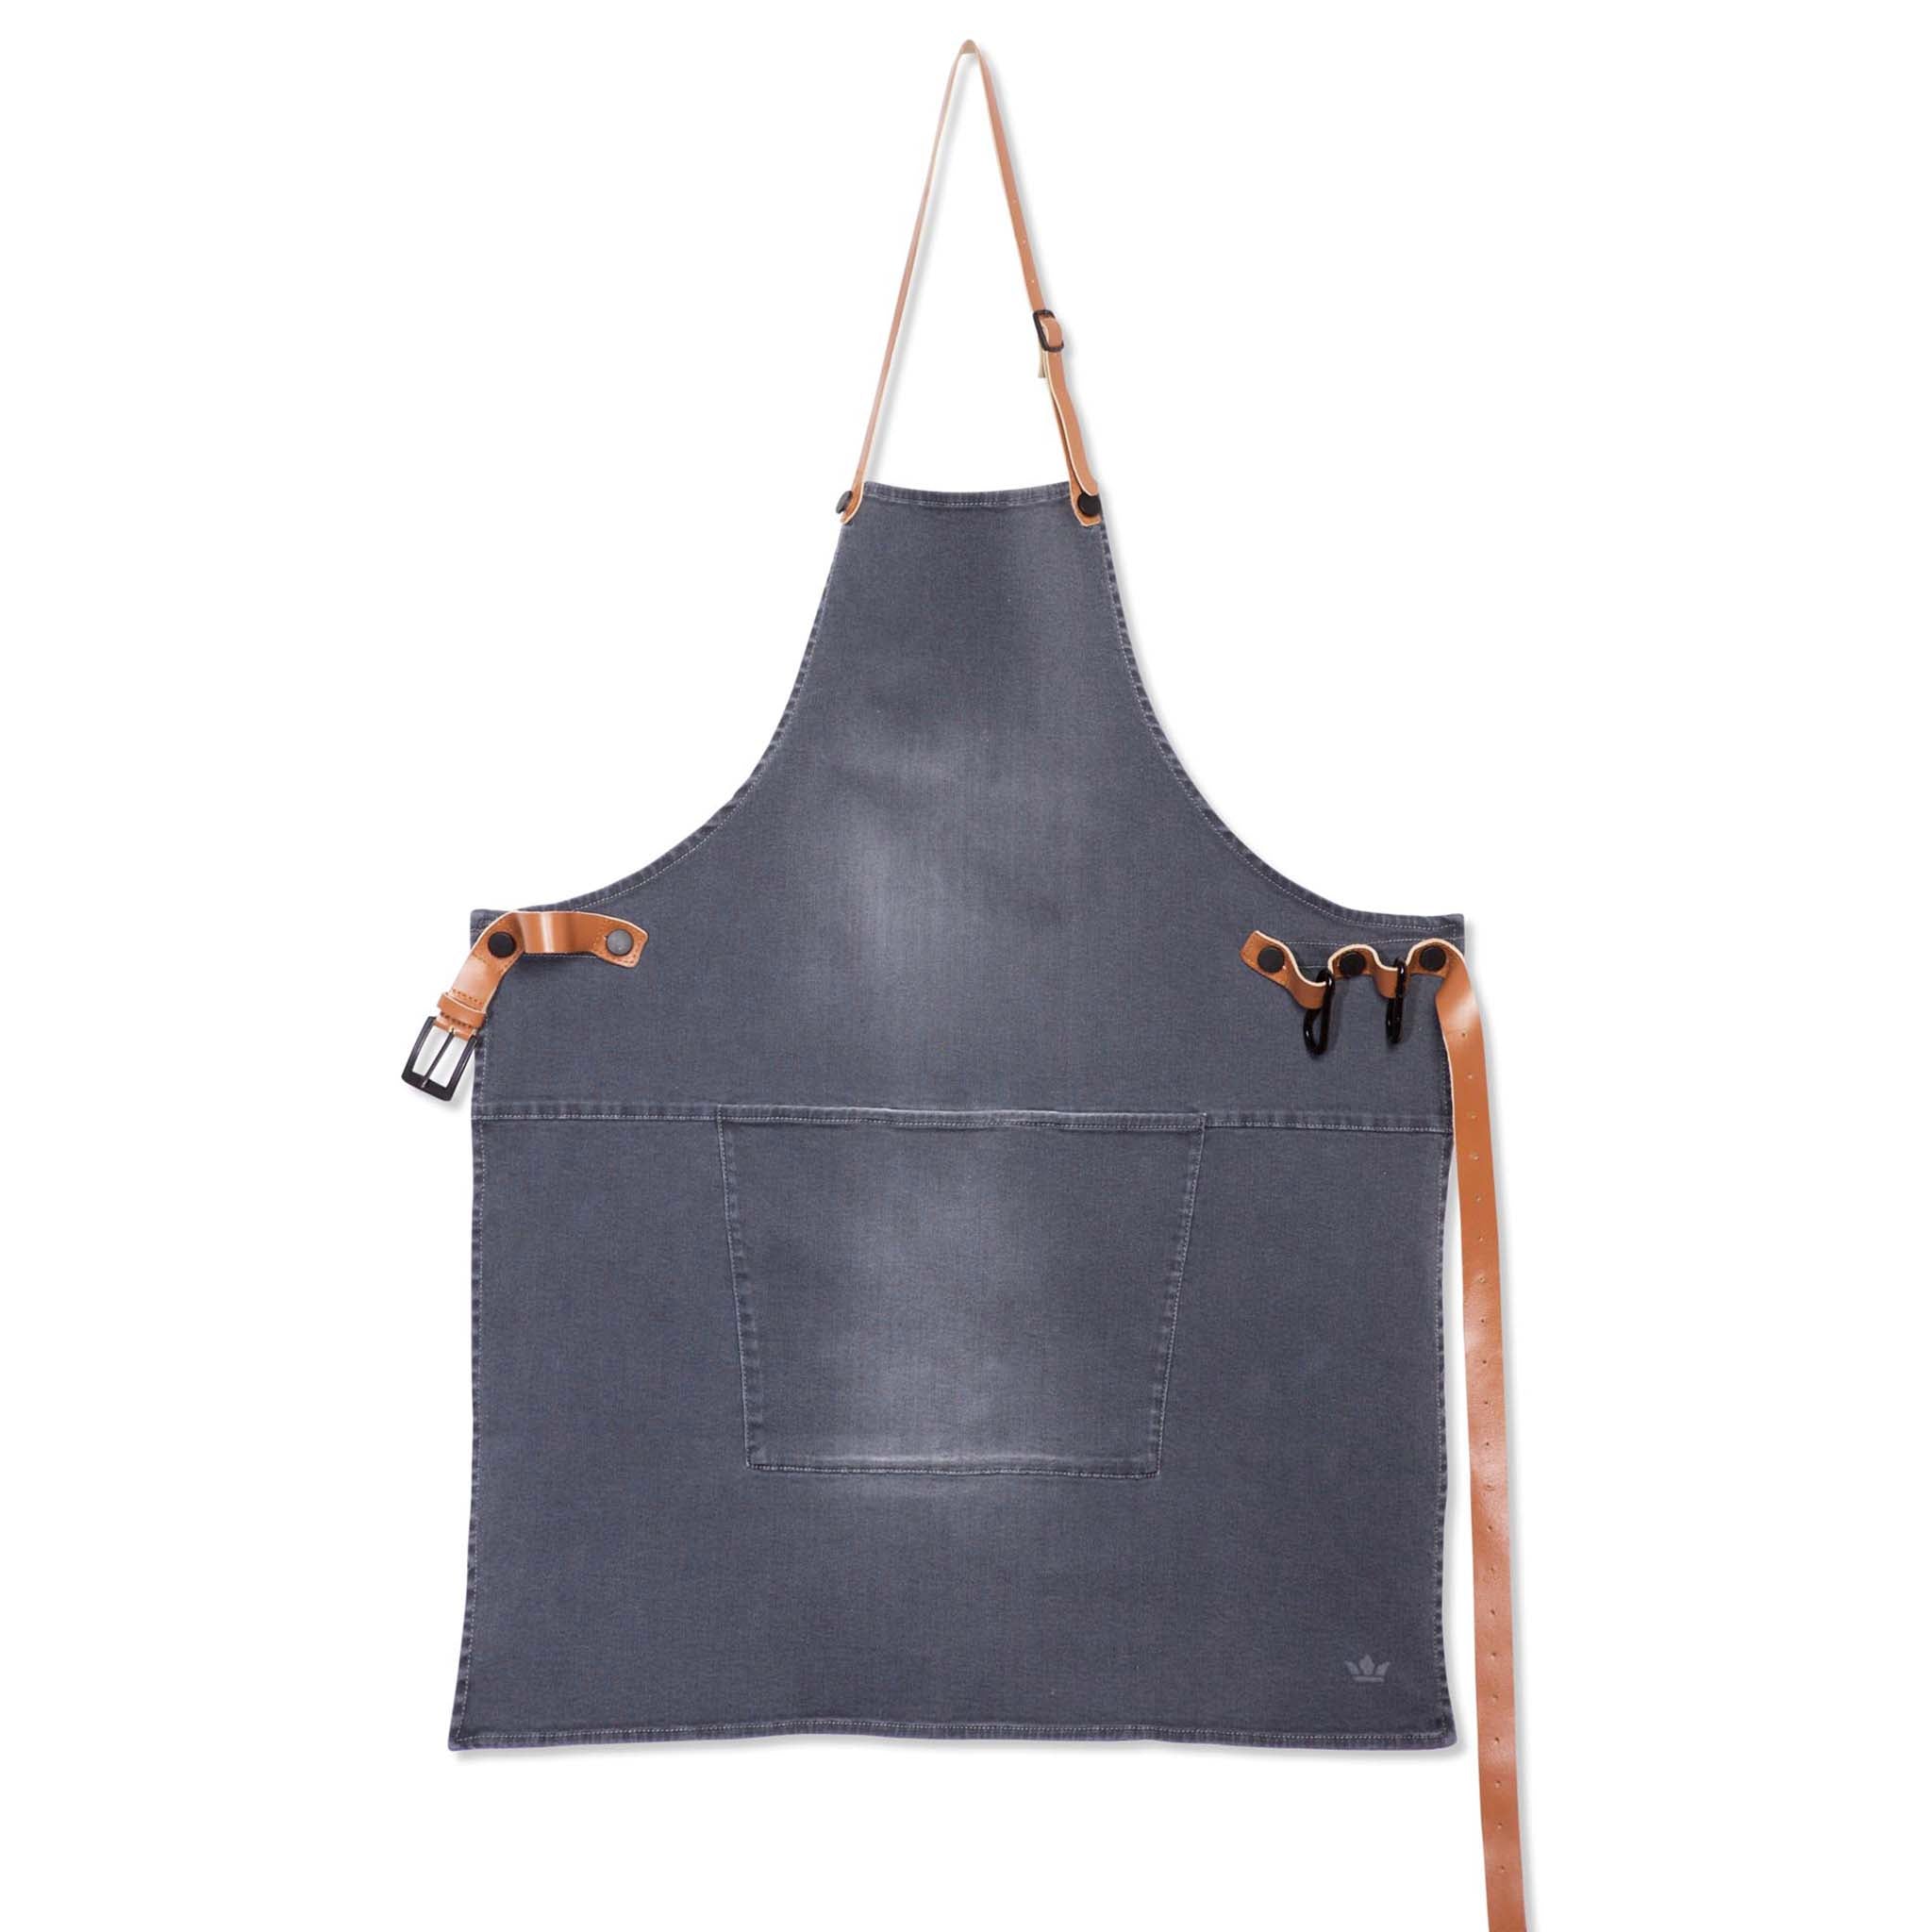 Dutchdeluxes Canvas BBQ Apron in Washed Grey Cookware Kitchen Clothing